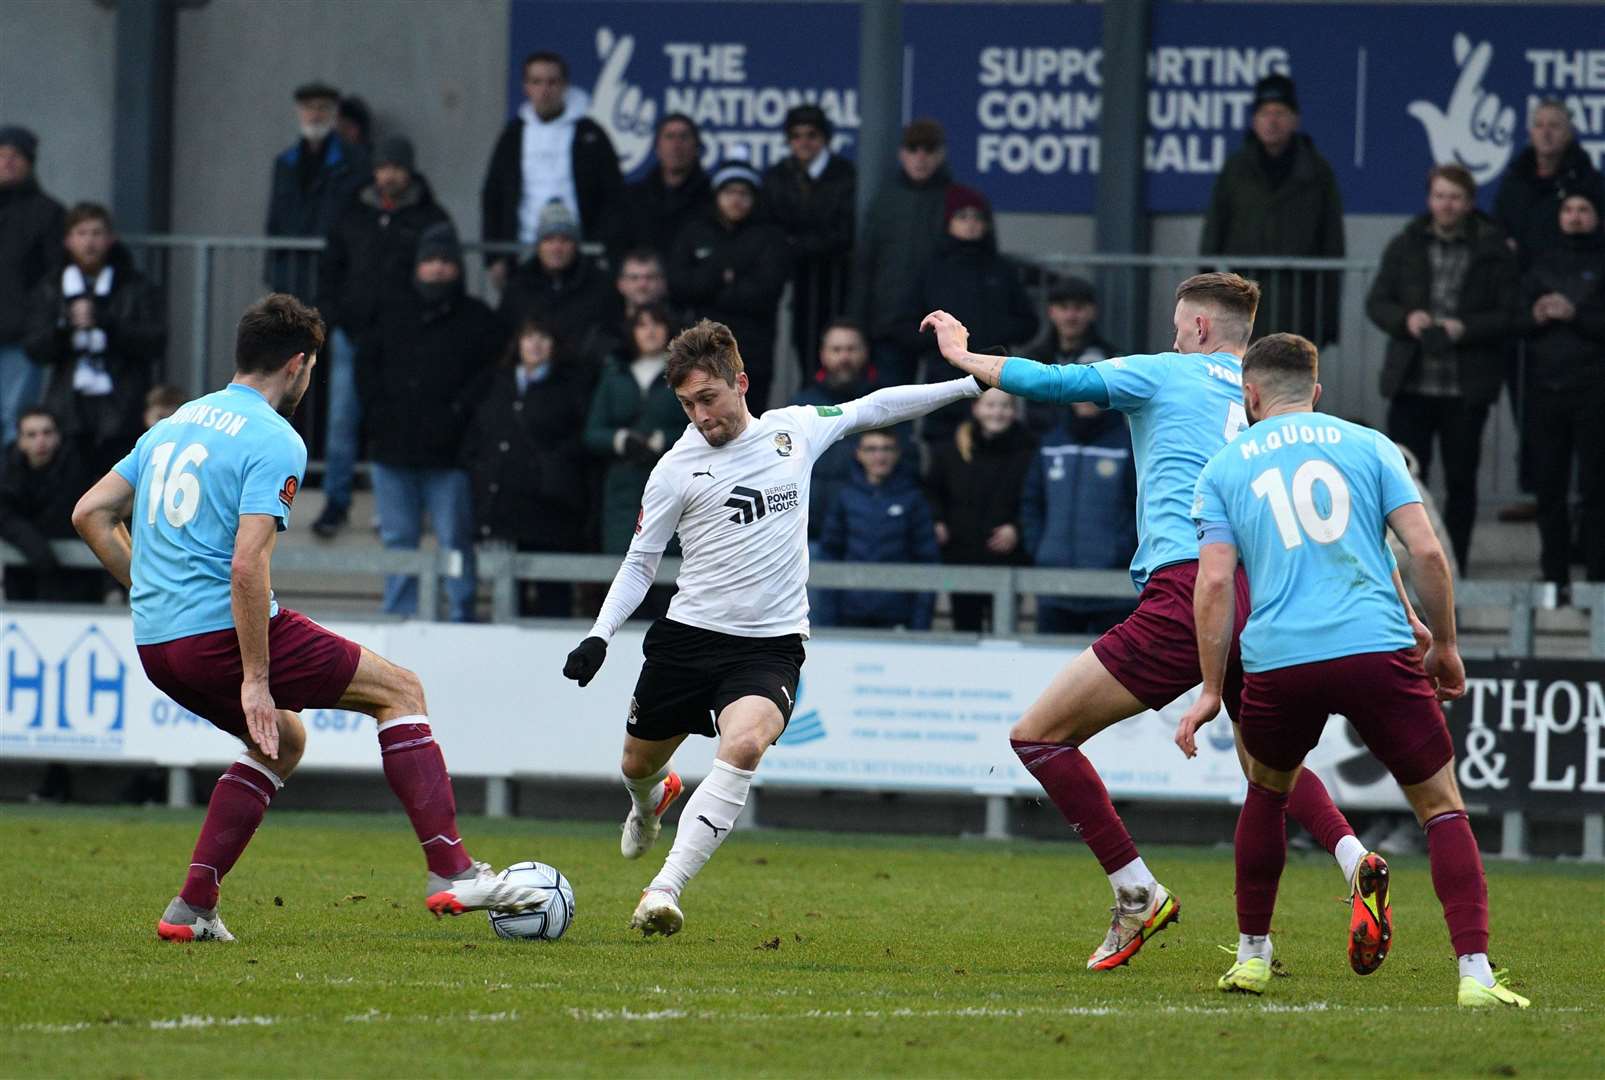 Darts striker Jake Robinson goes for goal against Weymouth. Picture: Barry Goodwin (54285242)